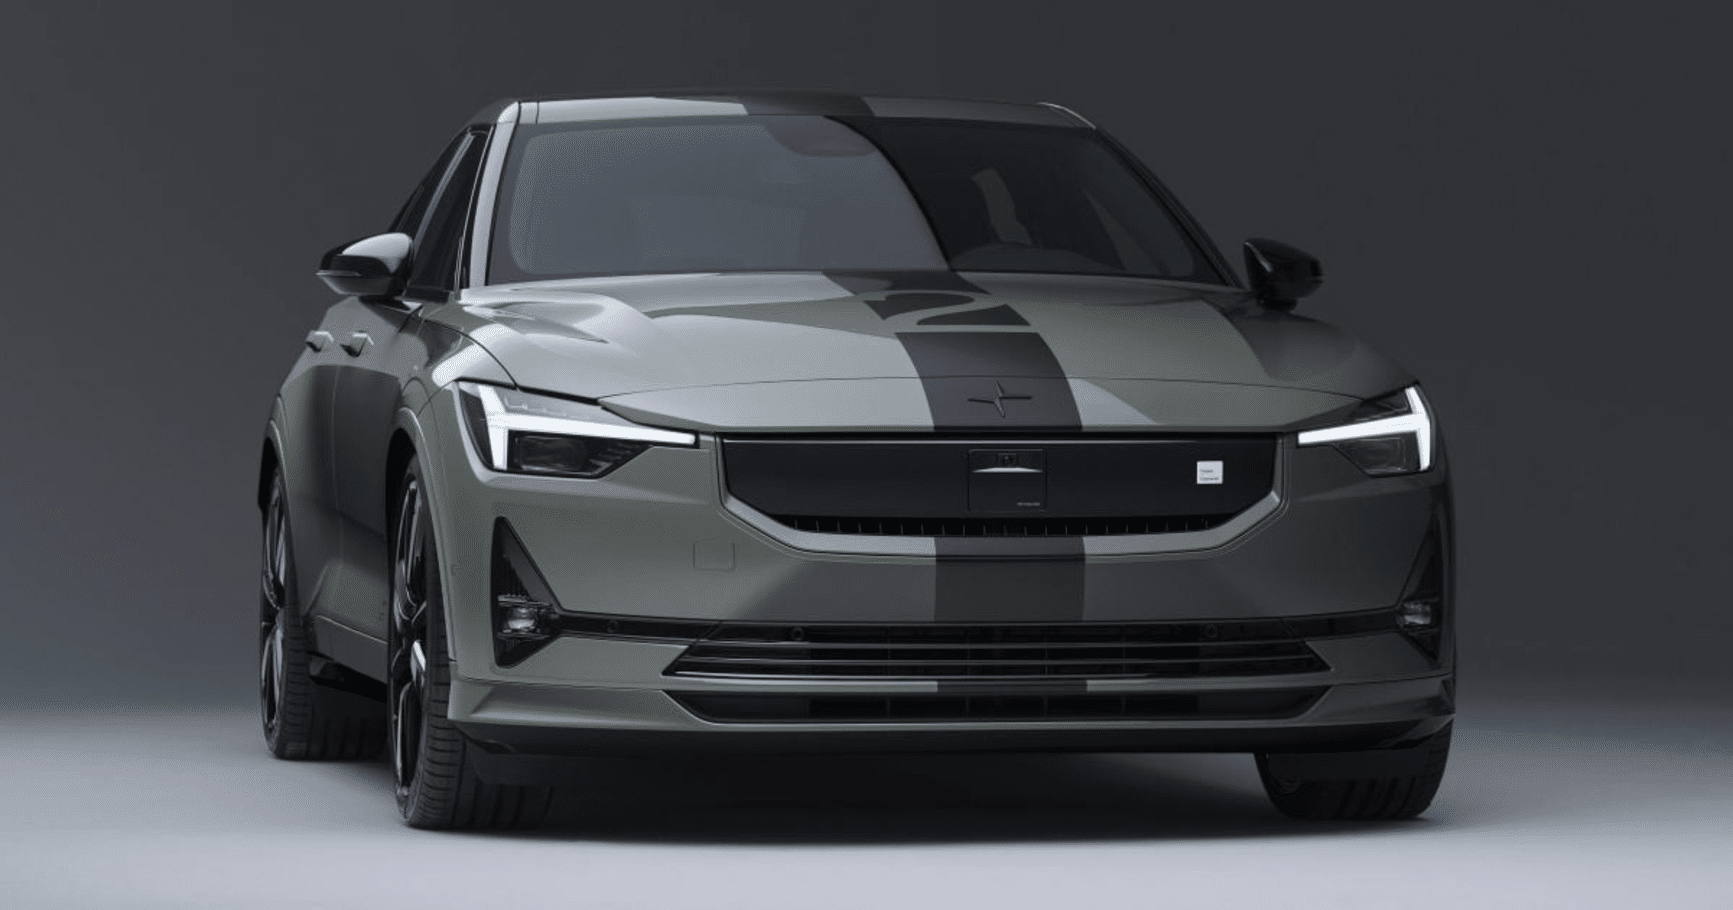 Polestar Teases More Powerful Variants, but Will There Be a Performance Sub-brand?